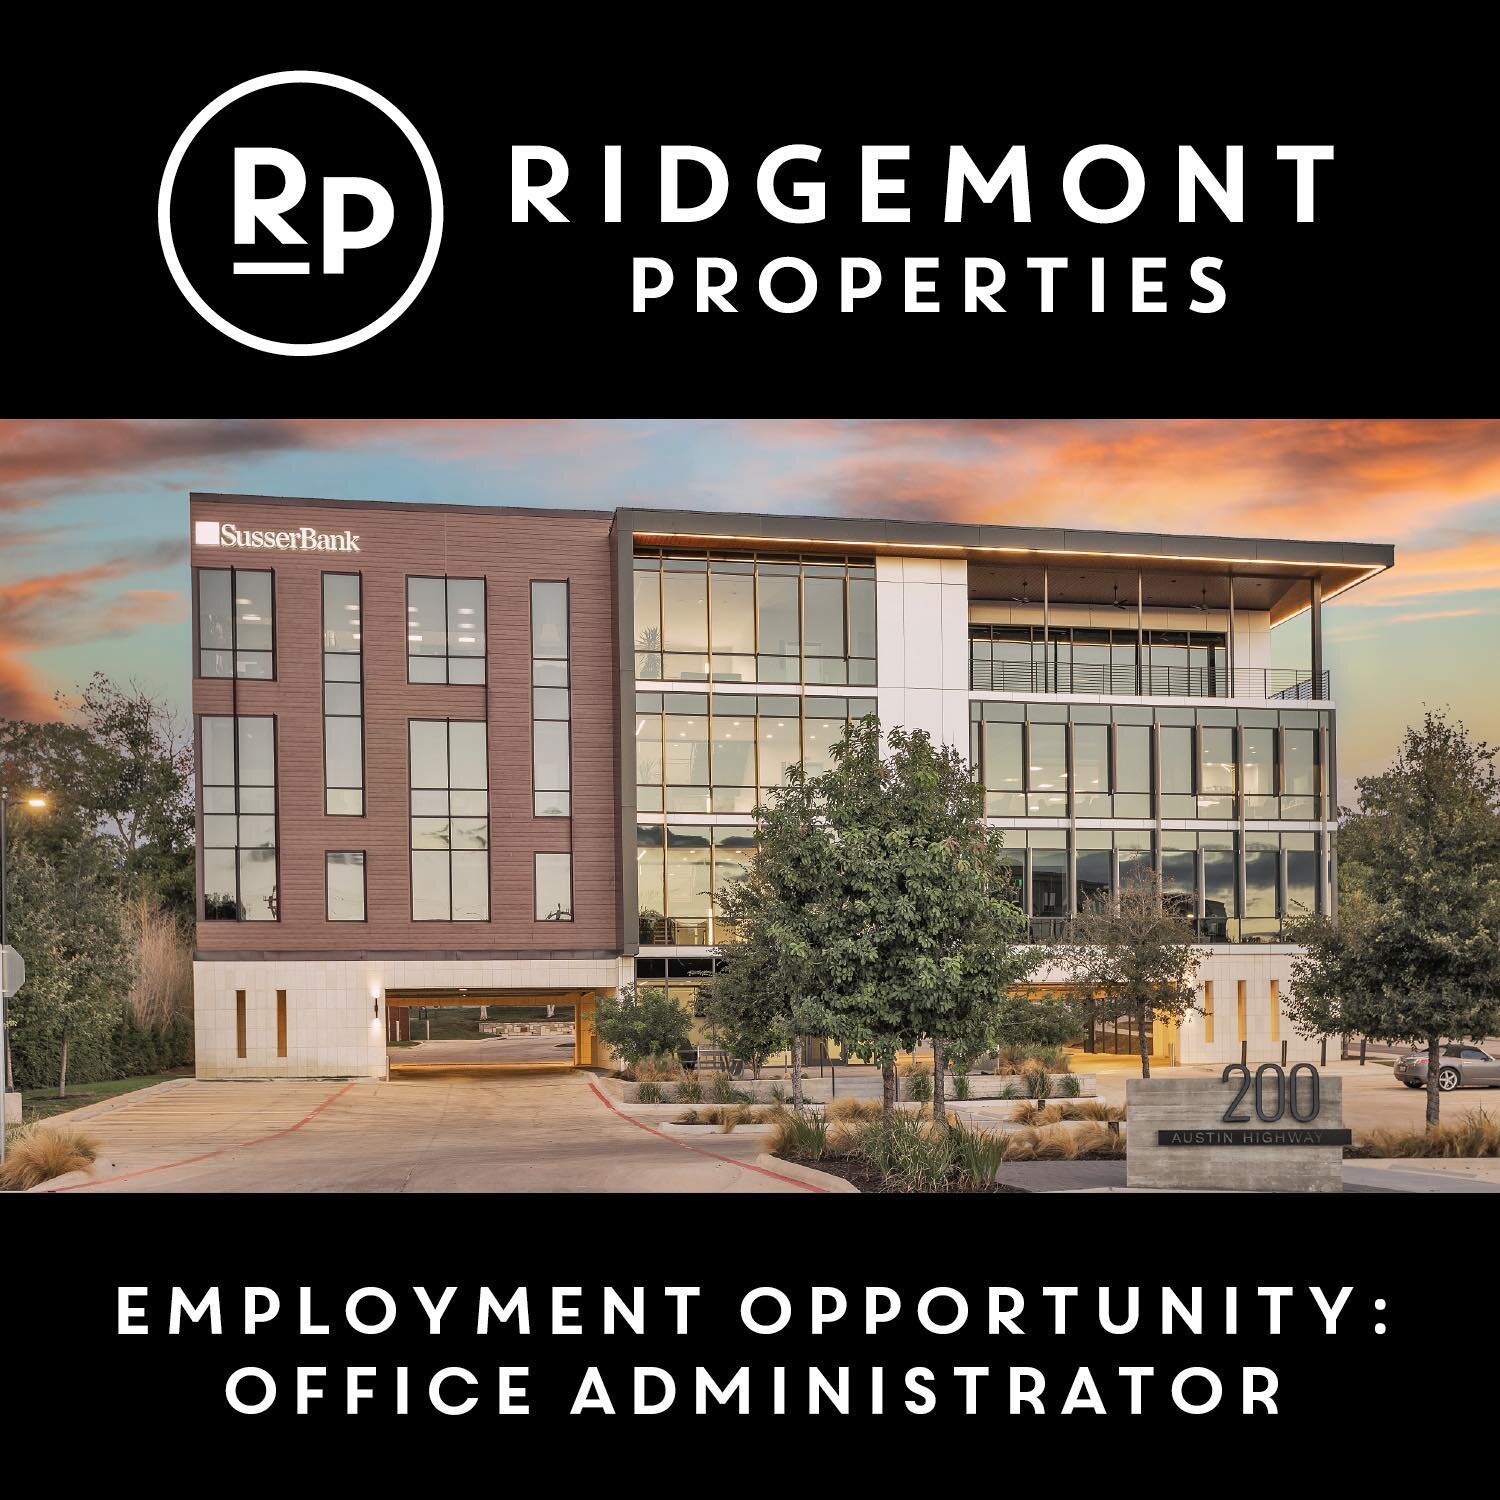 Ridgemont Properties has a job opening for an Office Administrator. Please go to www.ridgemontproperties.com/employment-opportunities to view more details and to learn how to apply for this position. #ridgemontproperties #jobopening